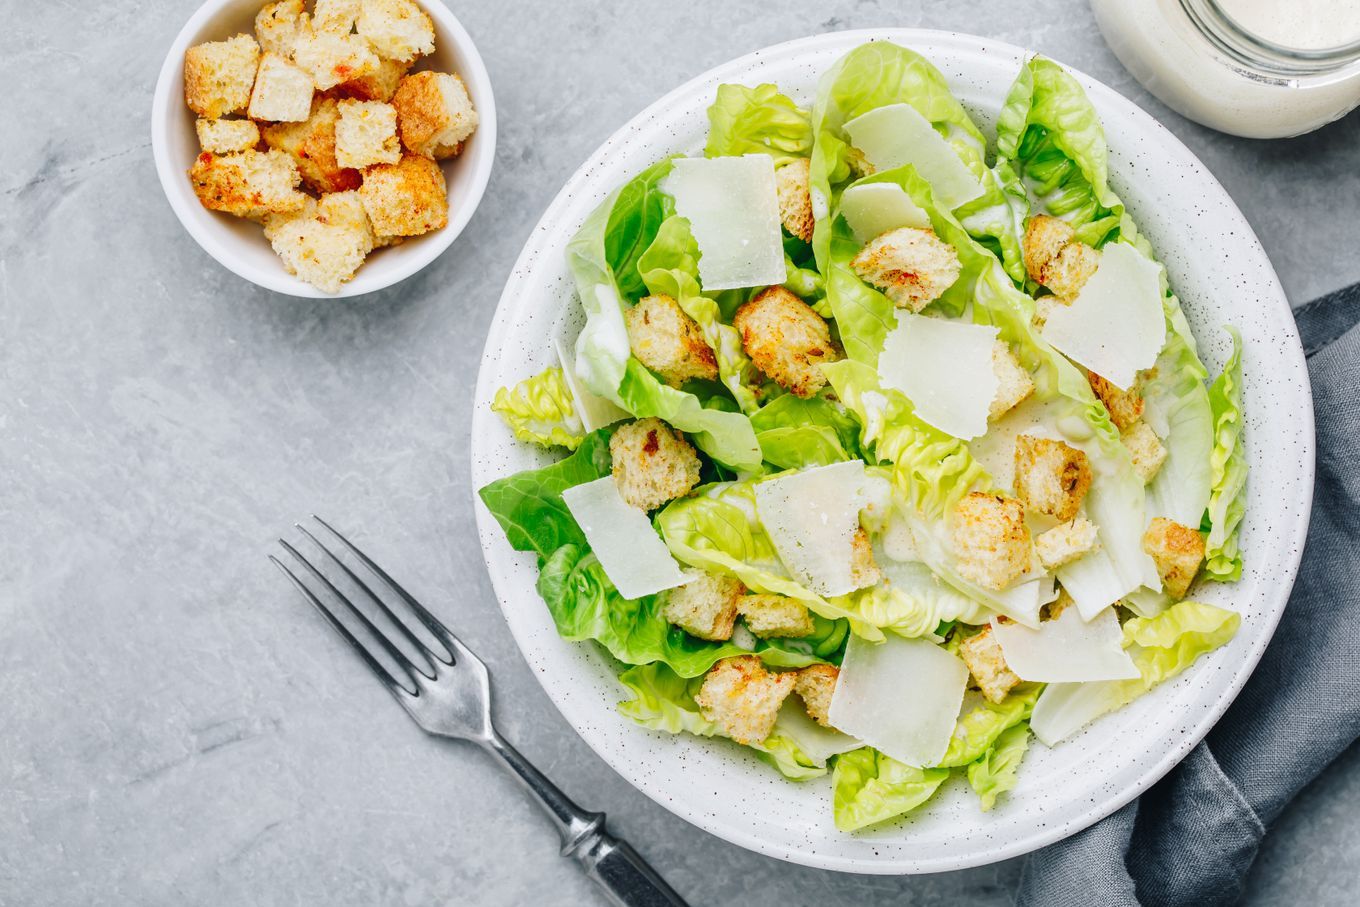 Caesar salad is a great summer lunch